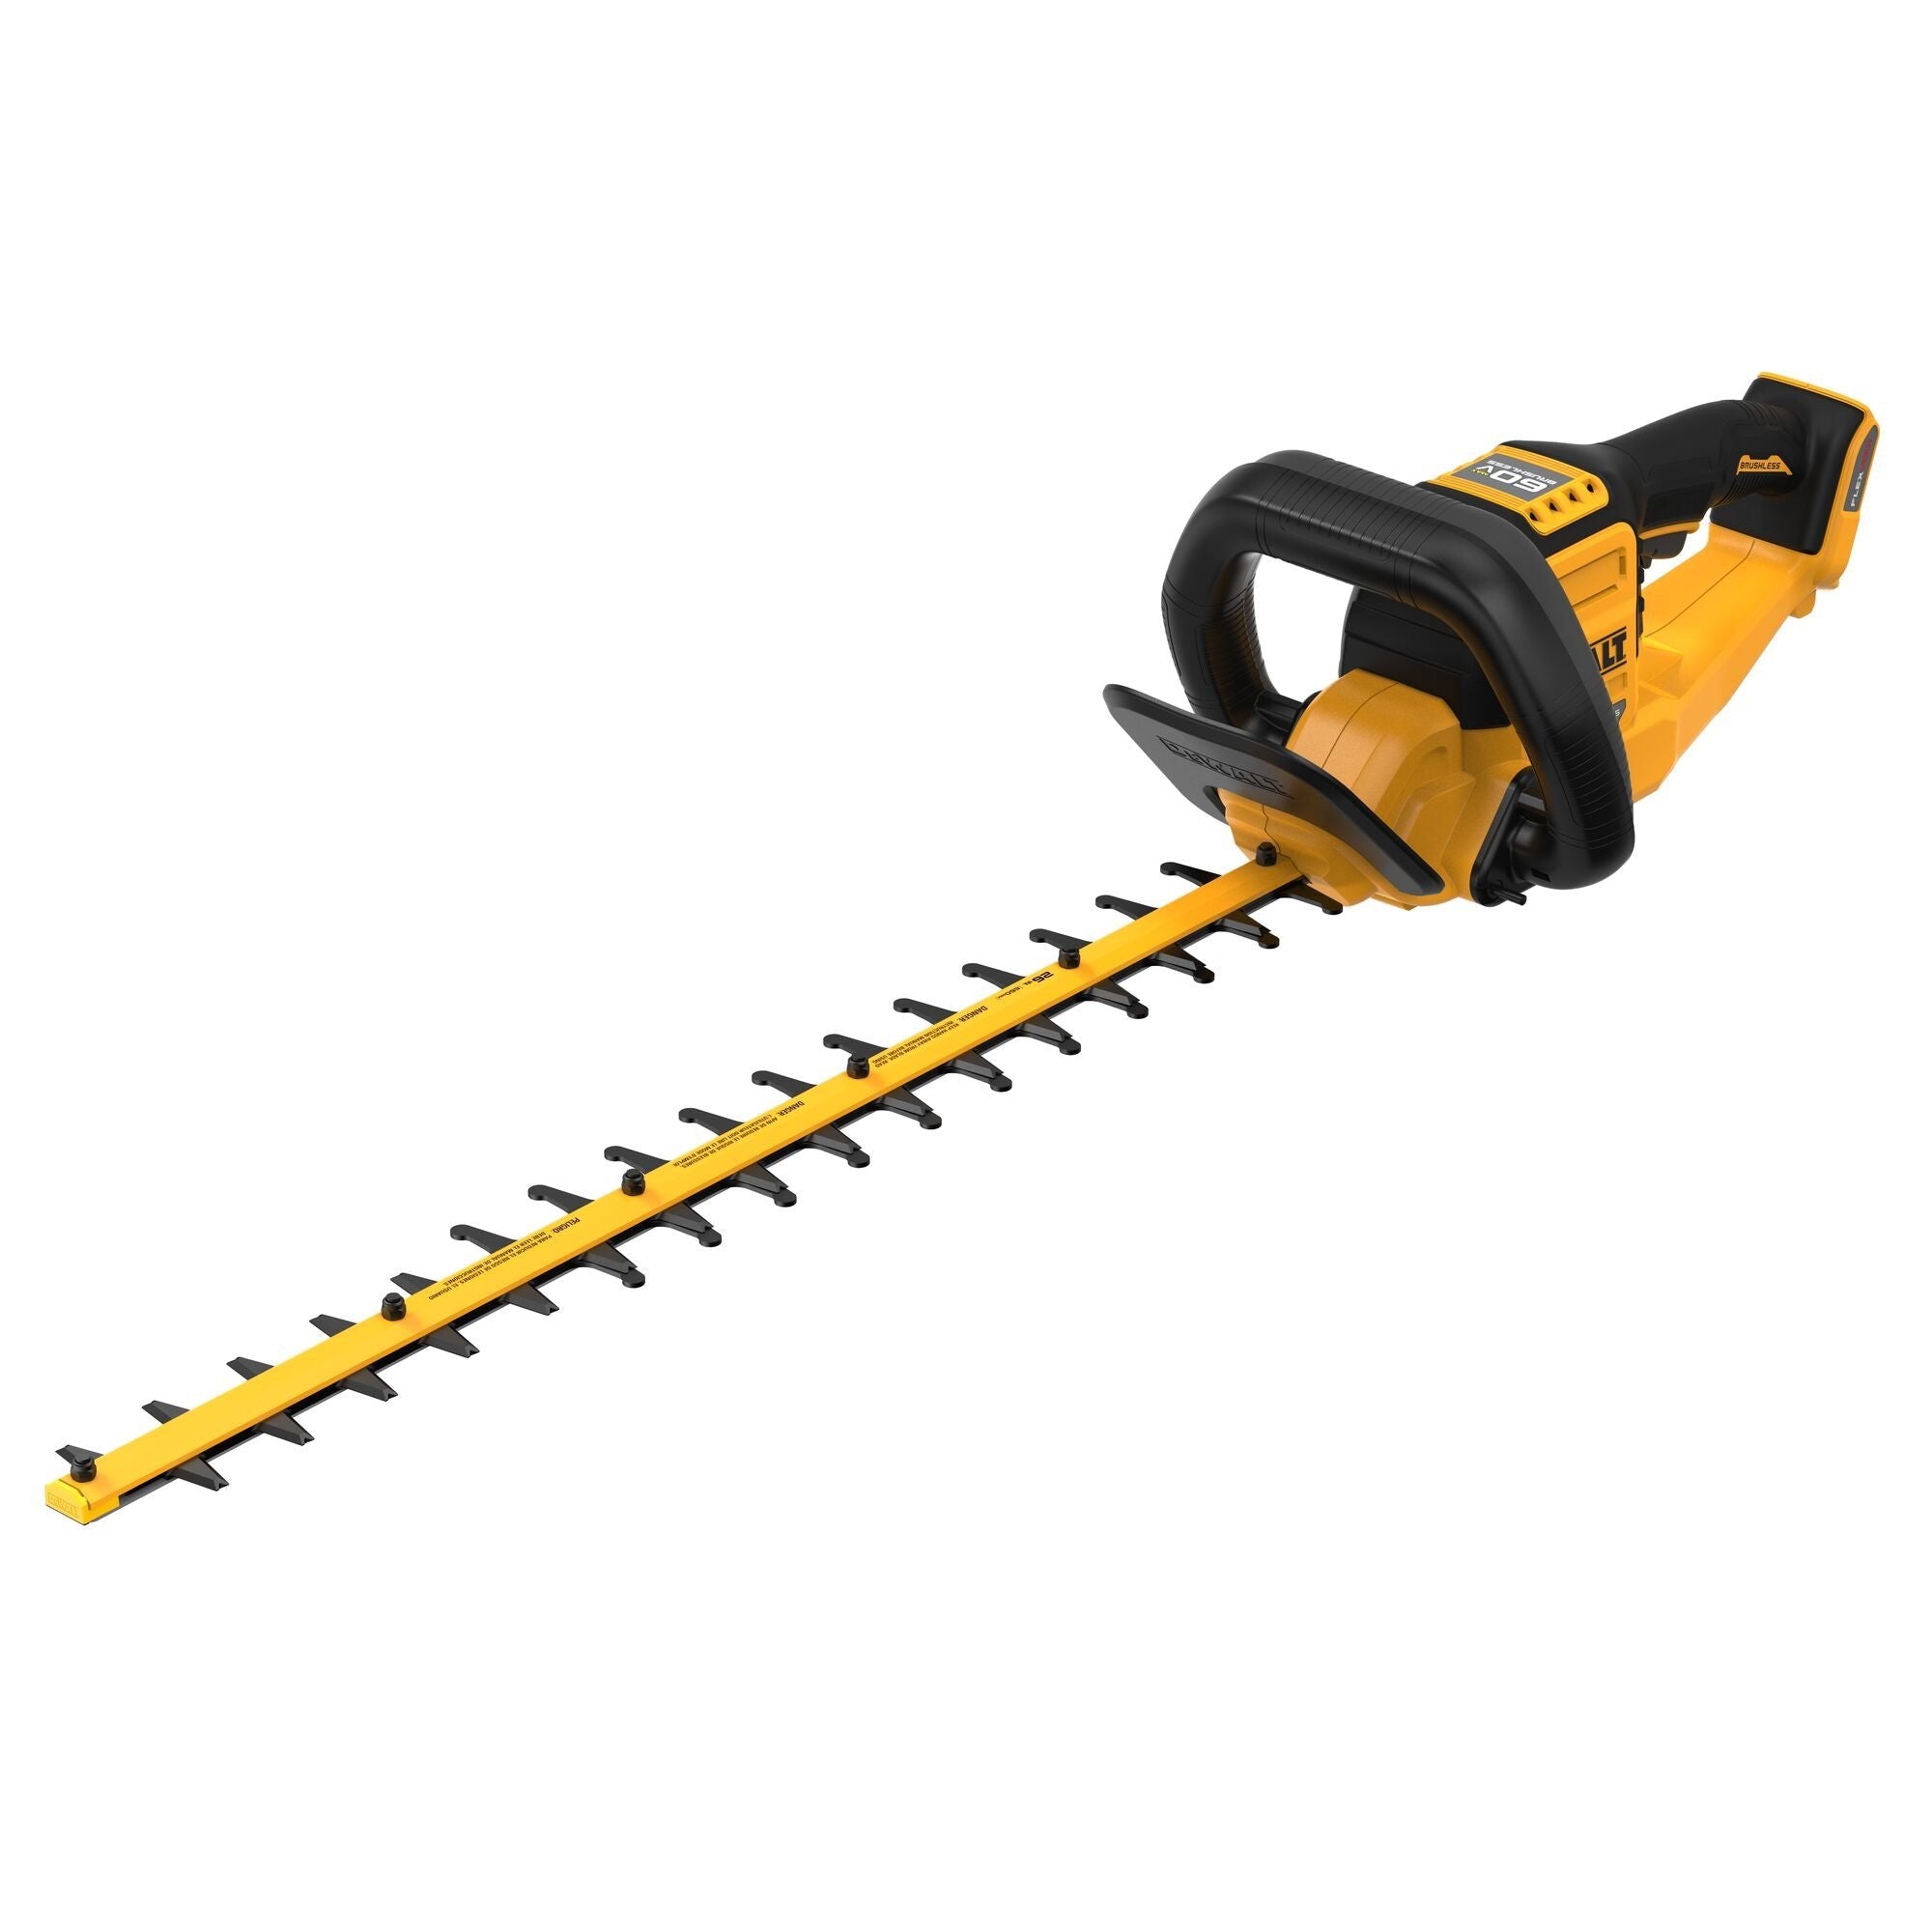 Dewalt DCHT870B 60V MAX* 26 in. Brushless Cordless Hedge Trimmer (Tool Only)